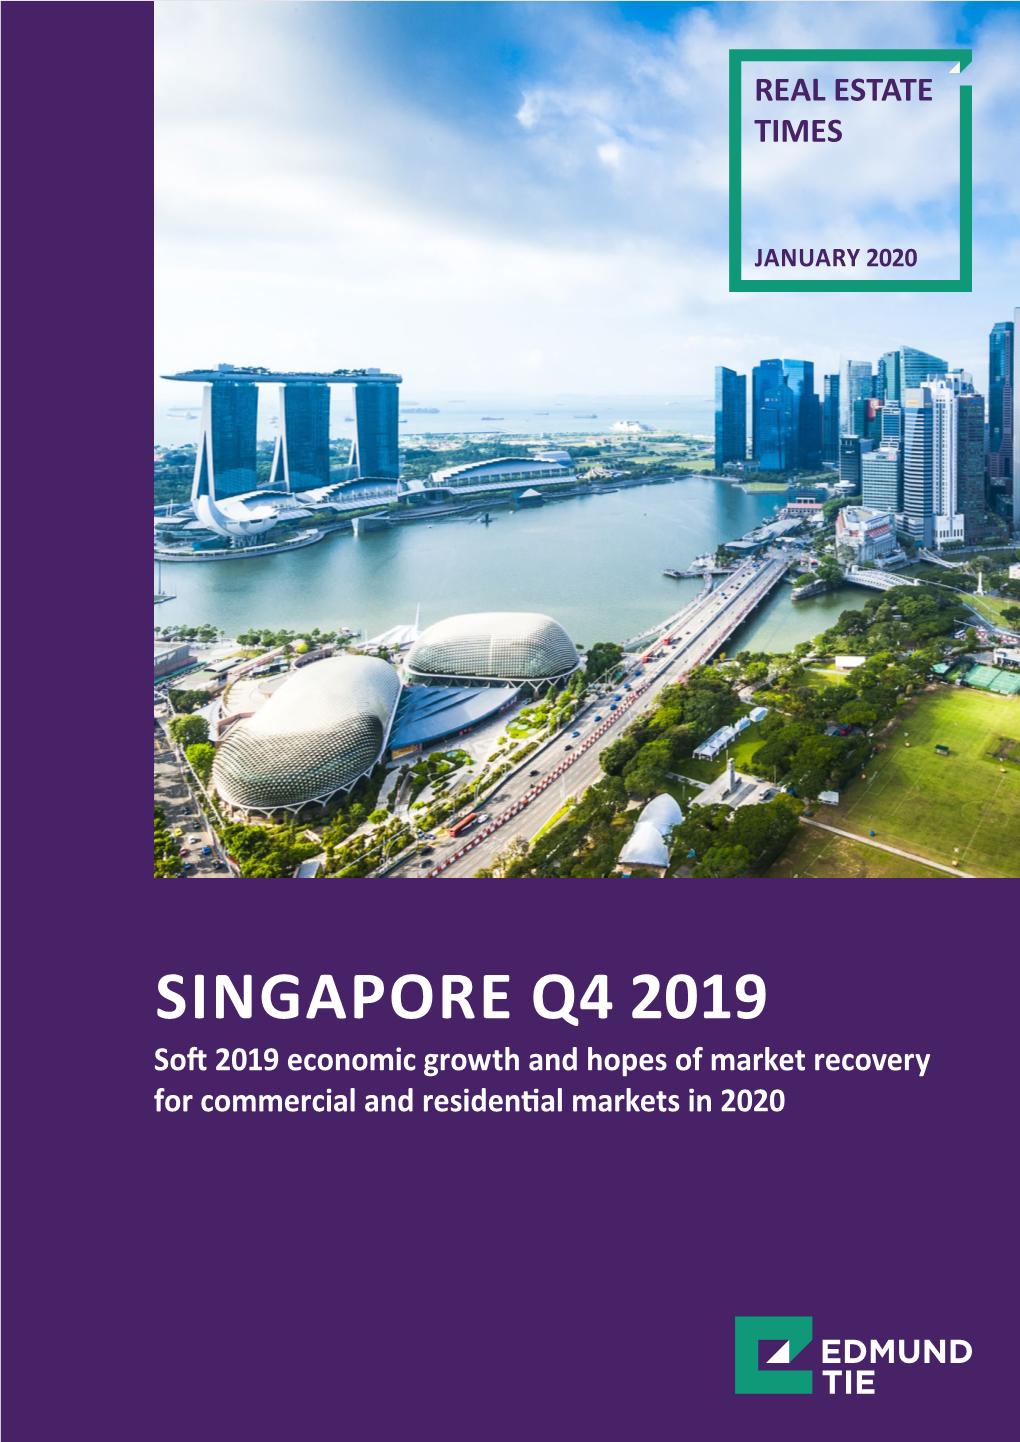 SINGAPORE Q4 2019 Soft 2019 Economic Growth and Hopes of Market Recovery for Commercial and Residential Markets in 2020 ECONOMY